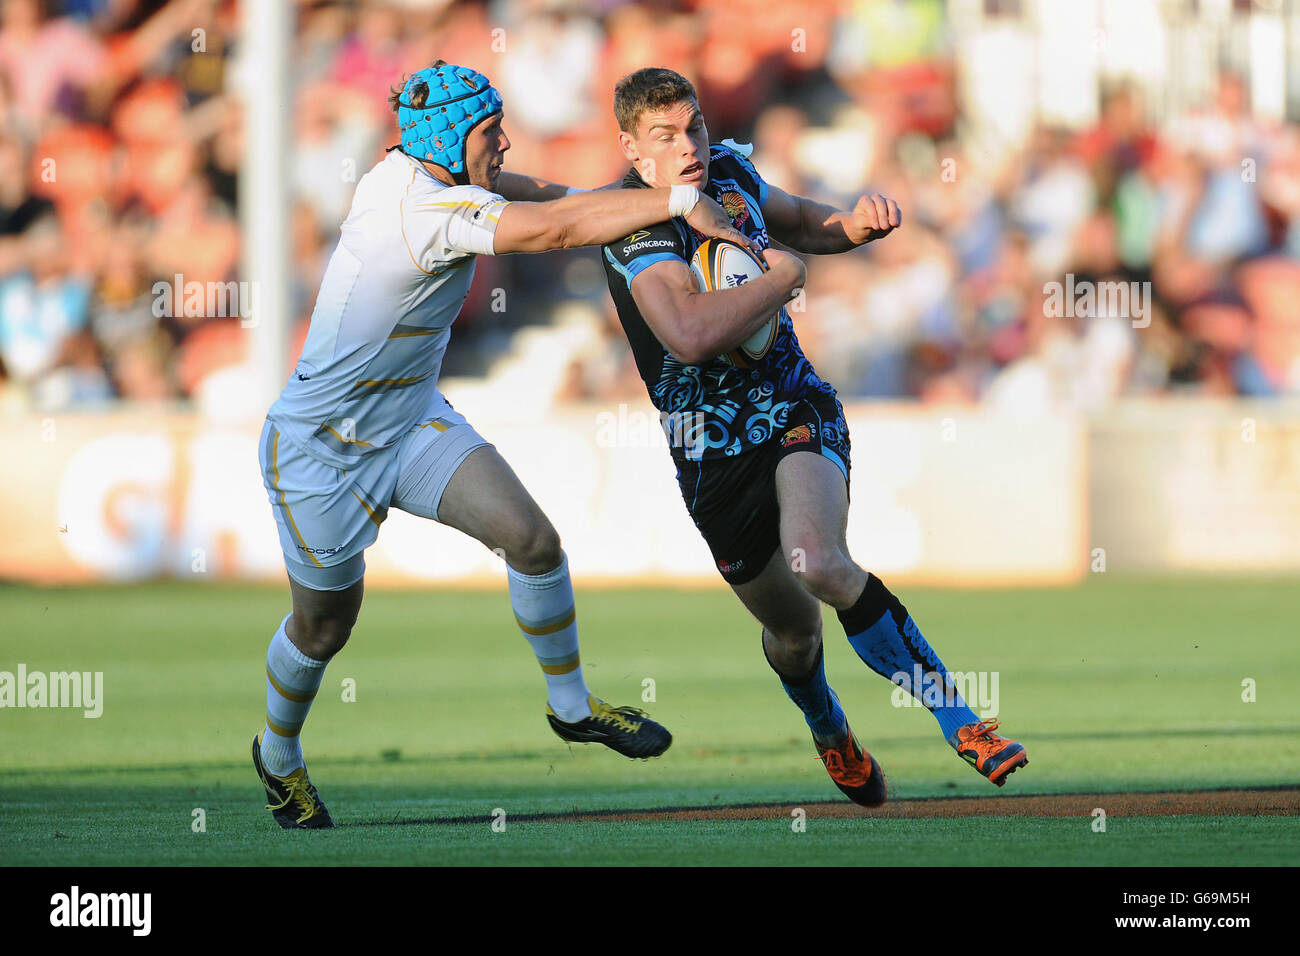 Exeter Chiefs 7's Chris Elder is tackled by Worcester Warriors 7's Richard De Carpentier during the Group A match of the J.P. Morgan Asset Management Premiership Rugby 7's at Kingsholm Stadium, Gloucester. Stock Photo